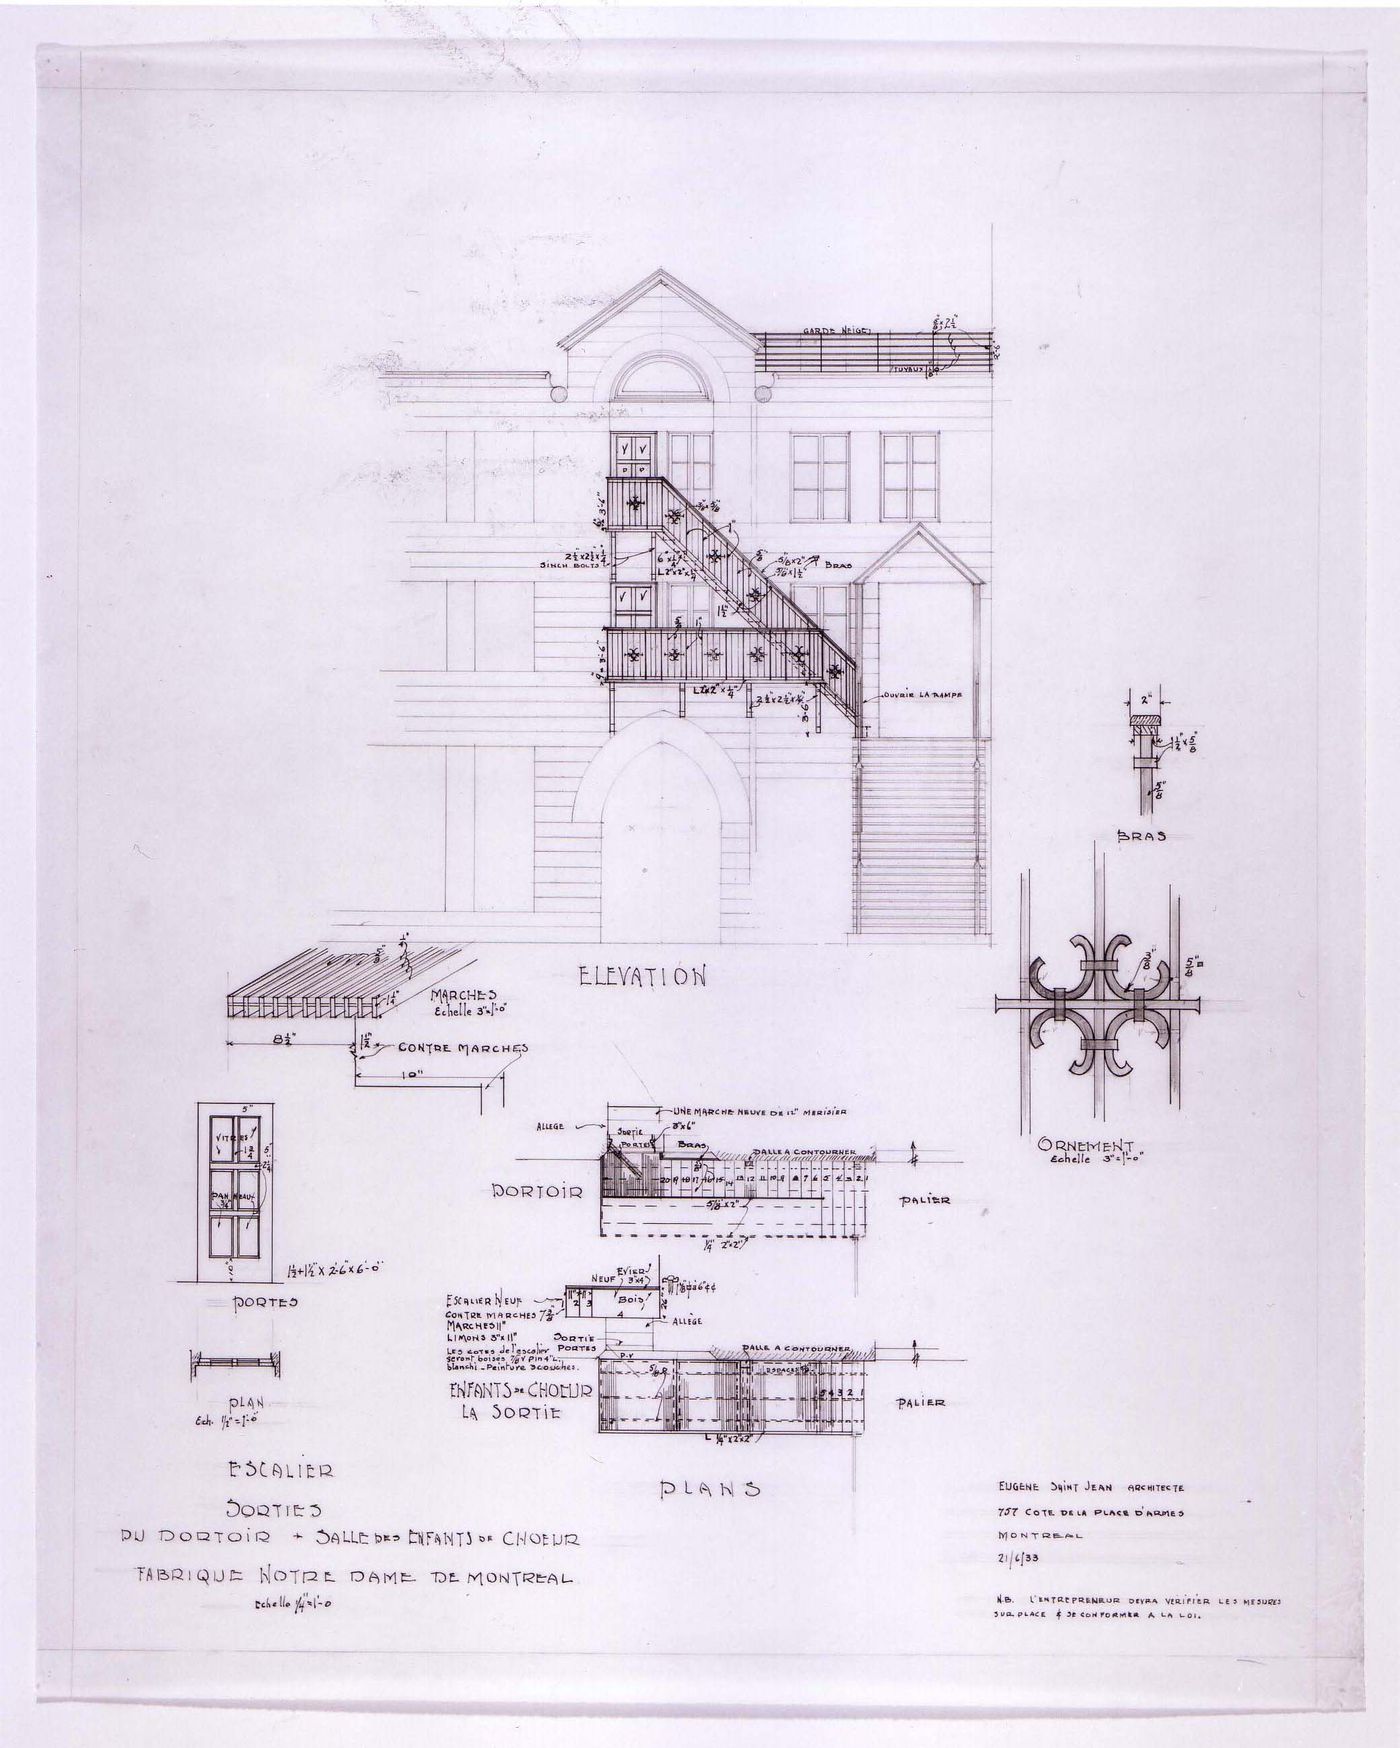 Elevations, plans and details for a fire escape for a dormitory and children's choir room for Notre-Dame de Montréal, apparently for the renovations of 1929-1949